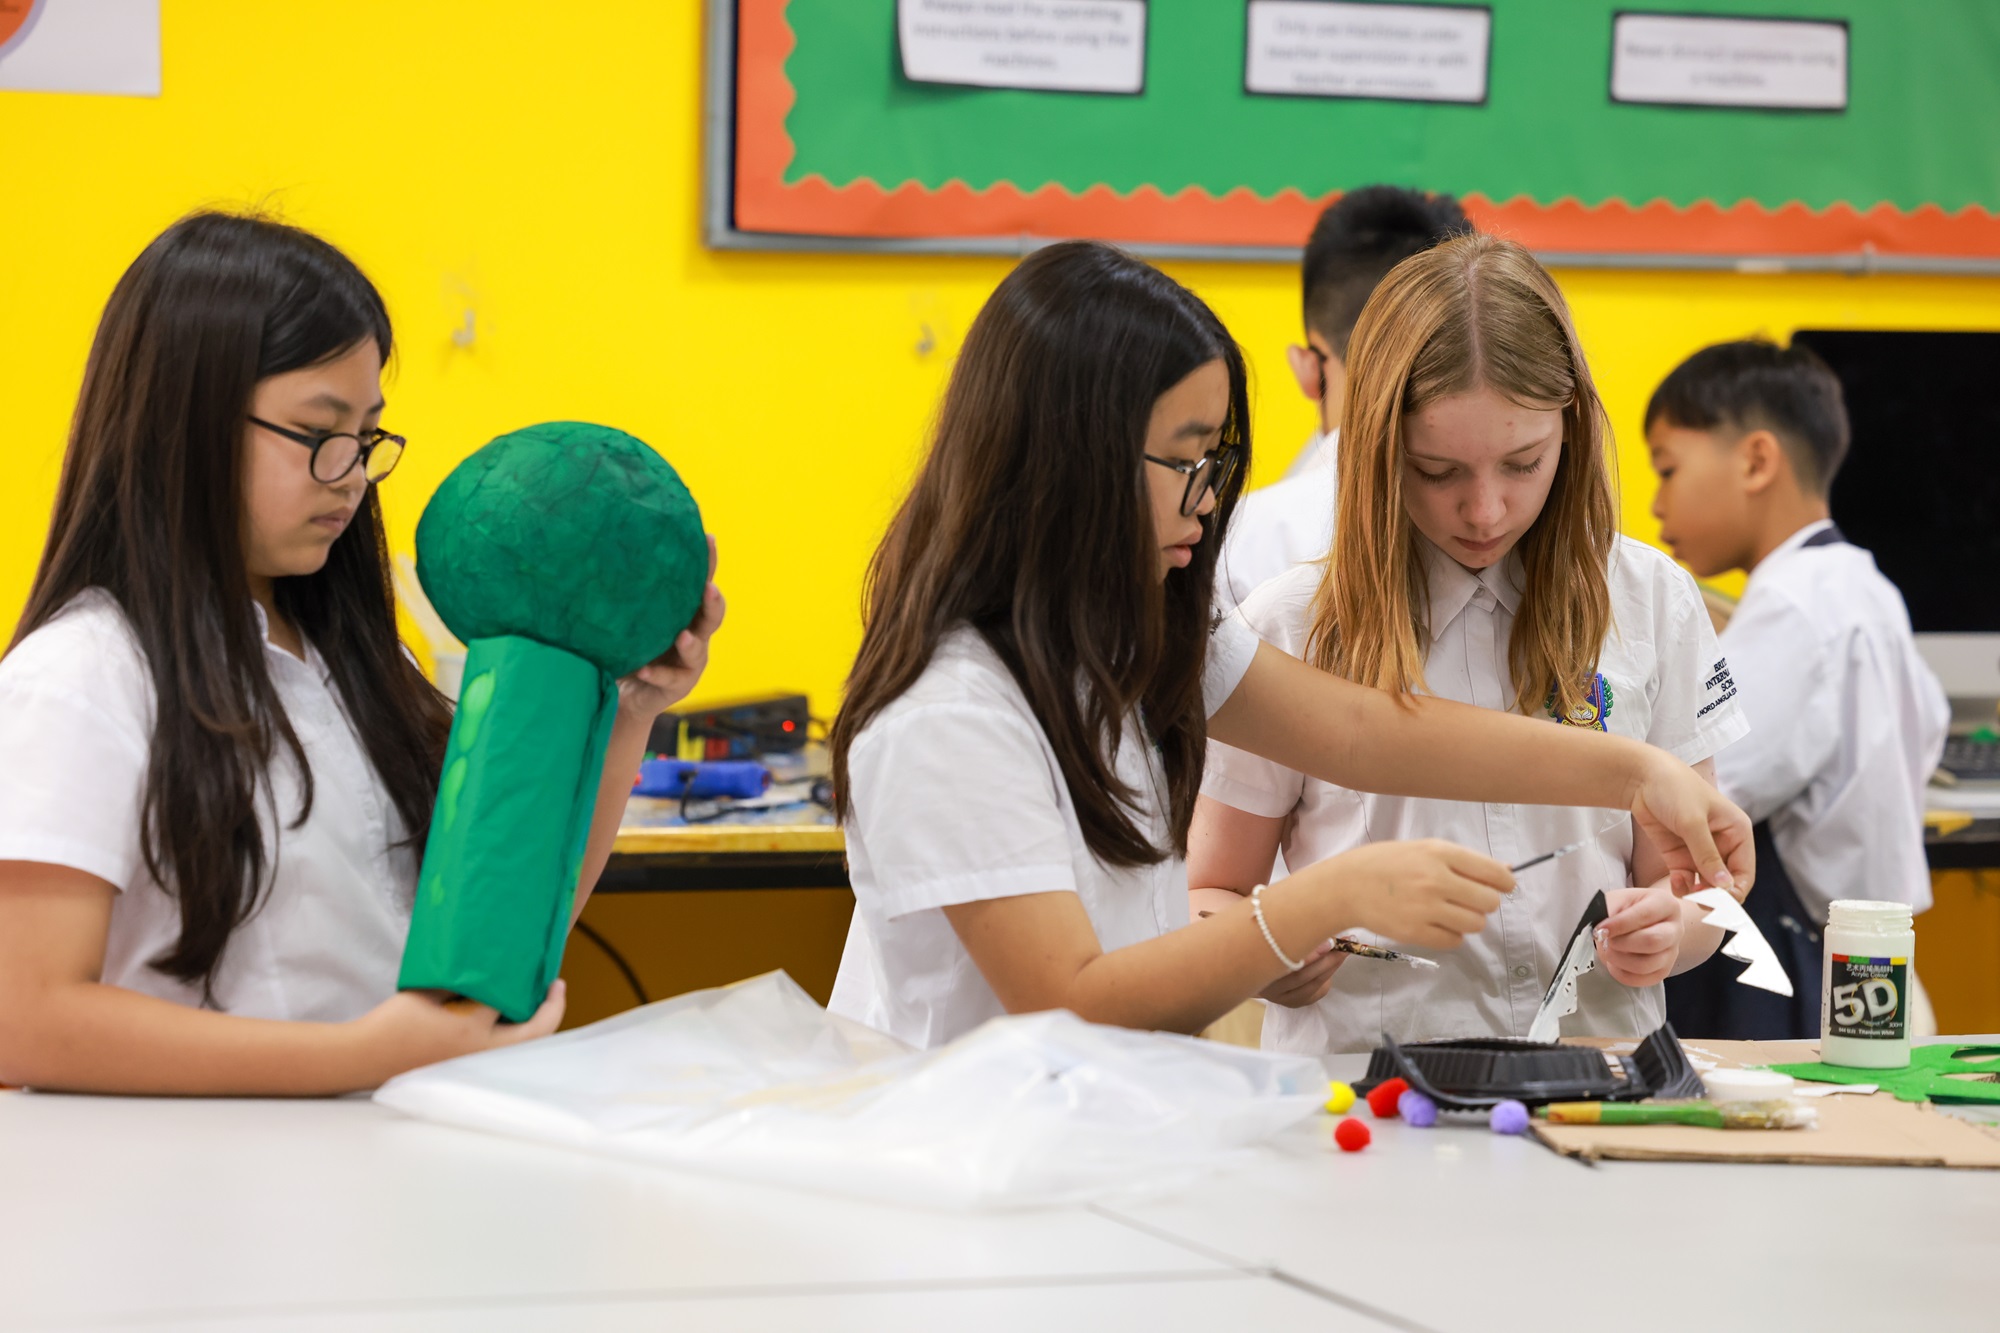 Through an existing collaboration between the world's best university MIT and the world's leading international schools organisation Nord Anglia Education, teachers and students look beyond the traditional, embracing curiosity and creatively problem-solving through real-world challenges. 